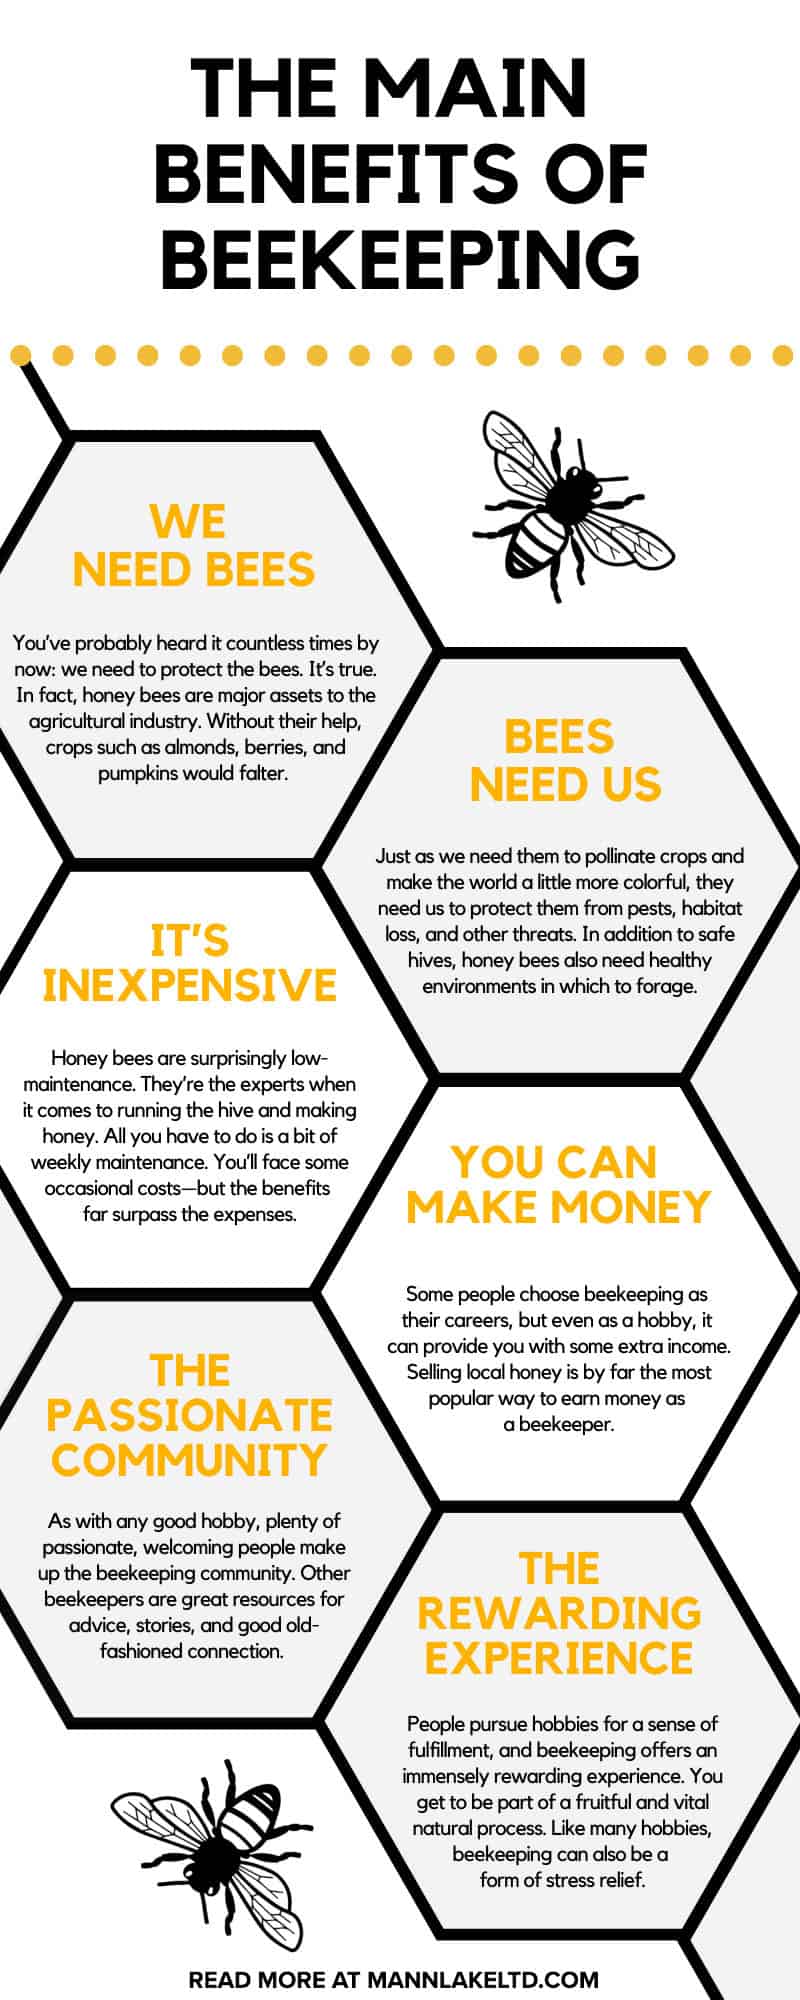 What Are The Benefits Of Beekeeping?